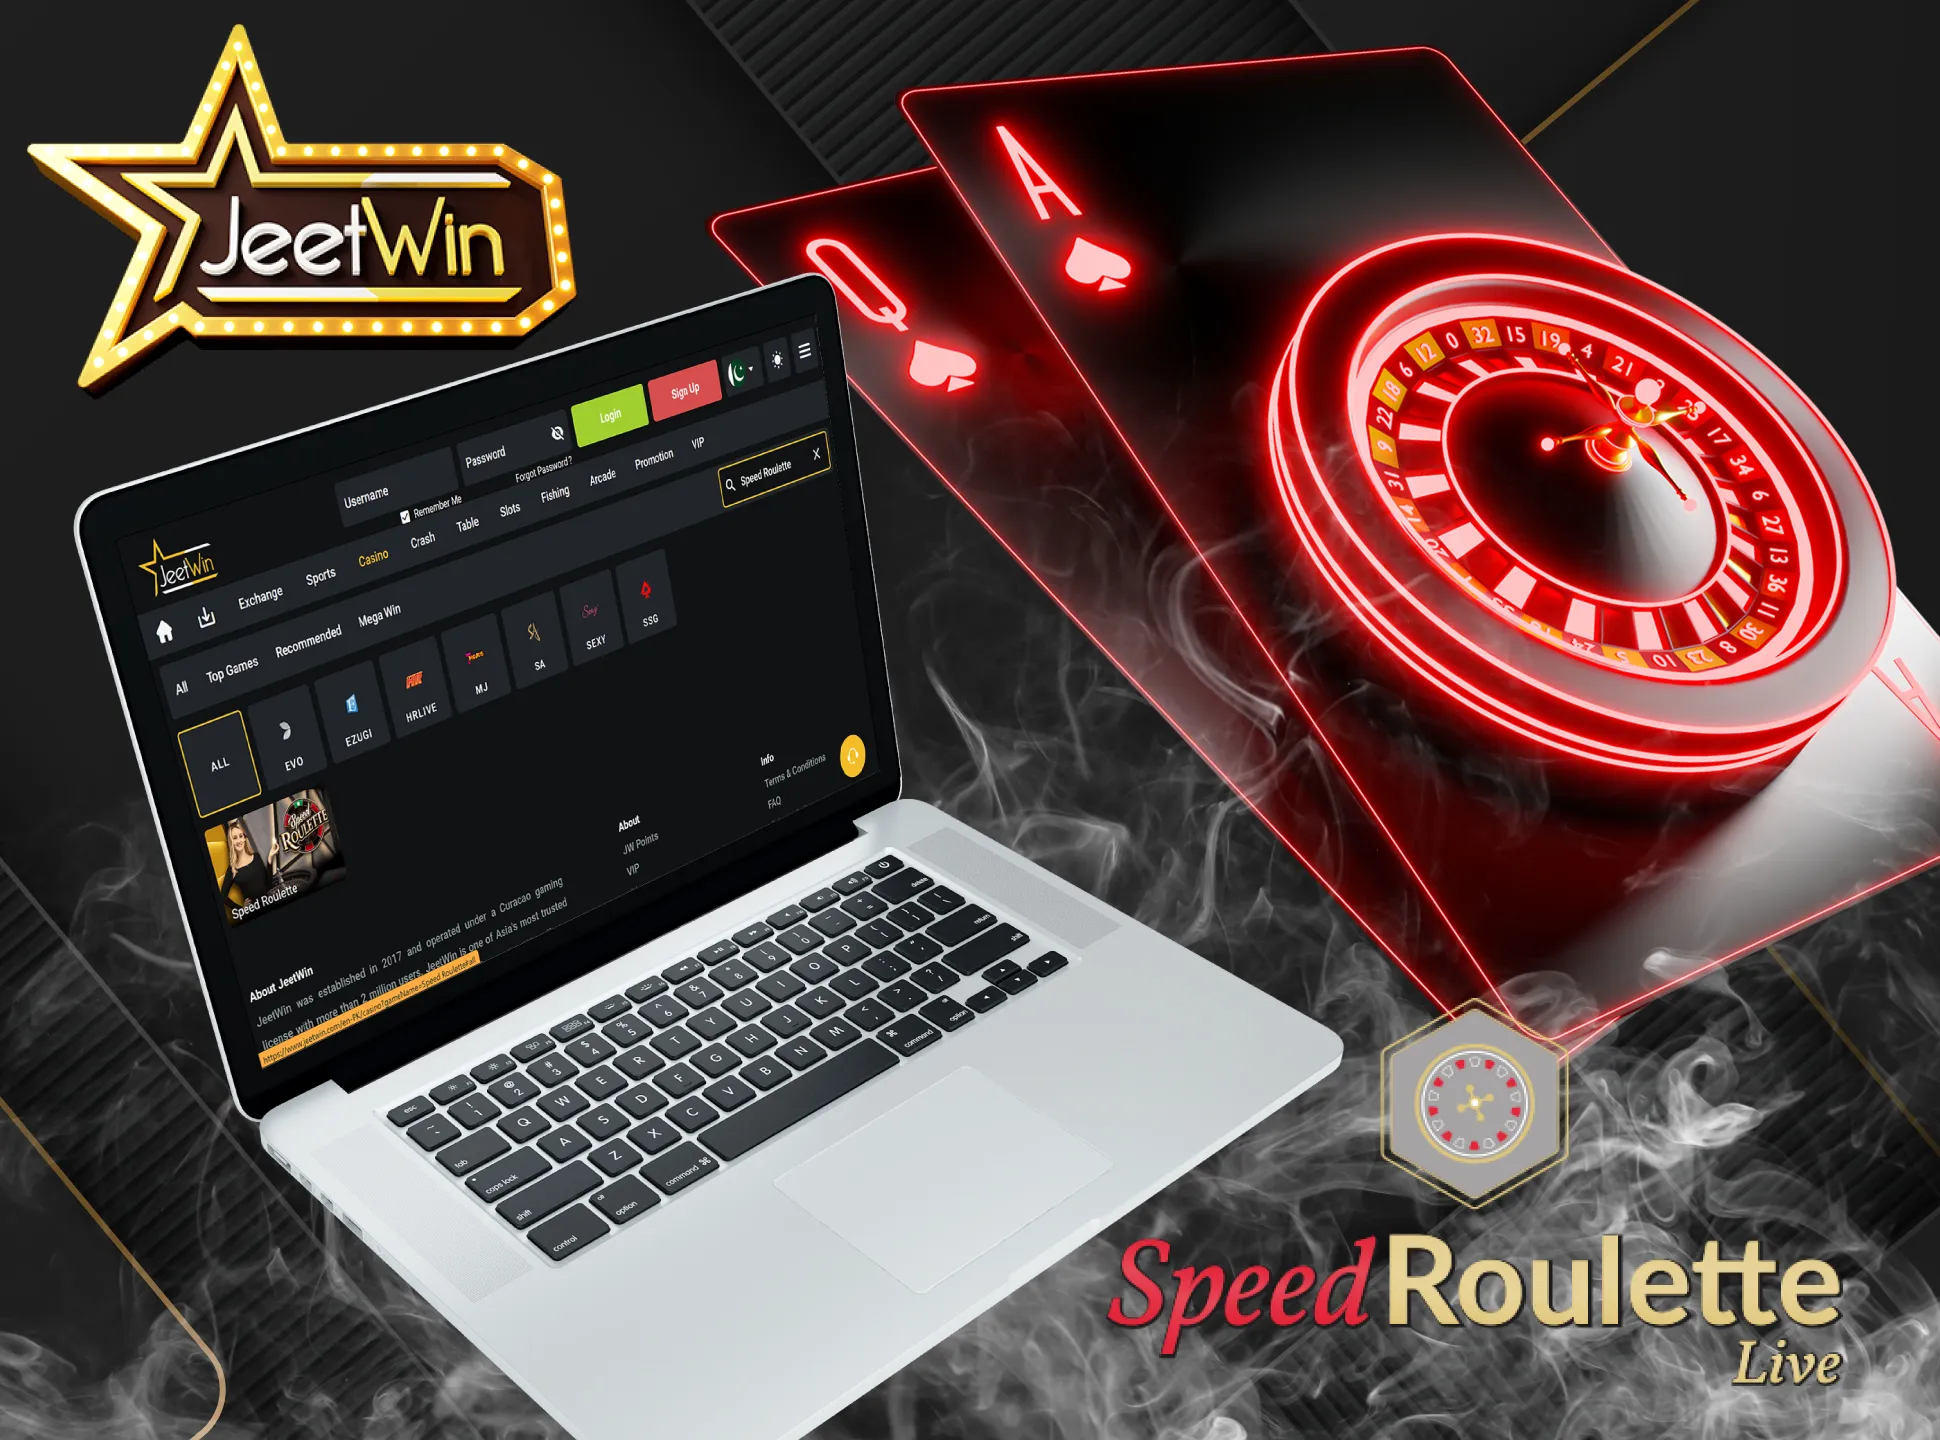 Try your luck at the Speed ​​Roulette game at JeetWin.